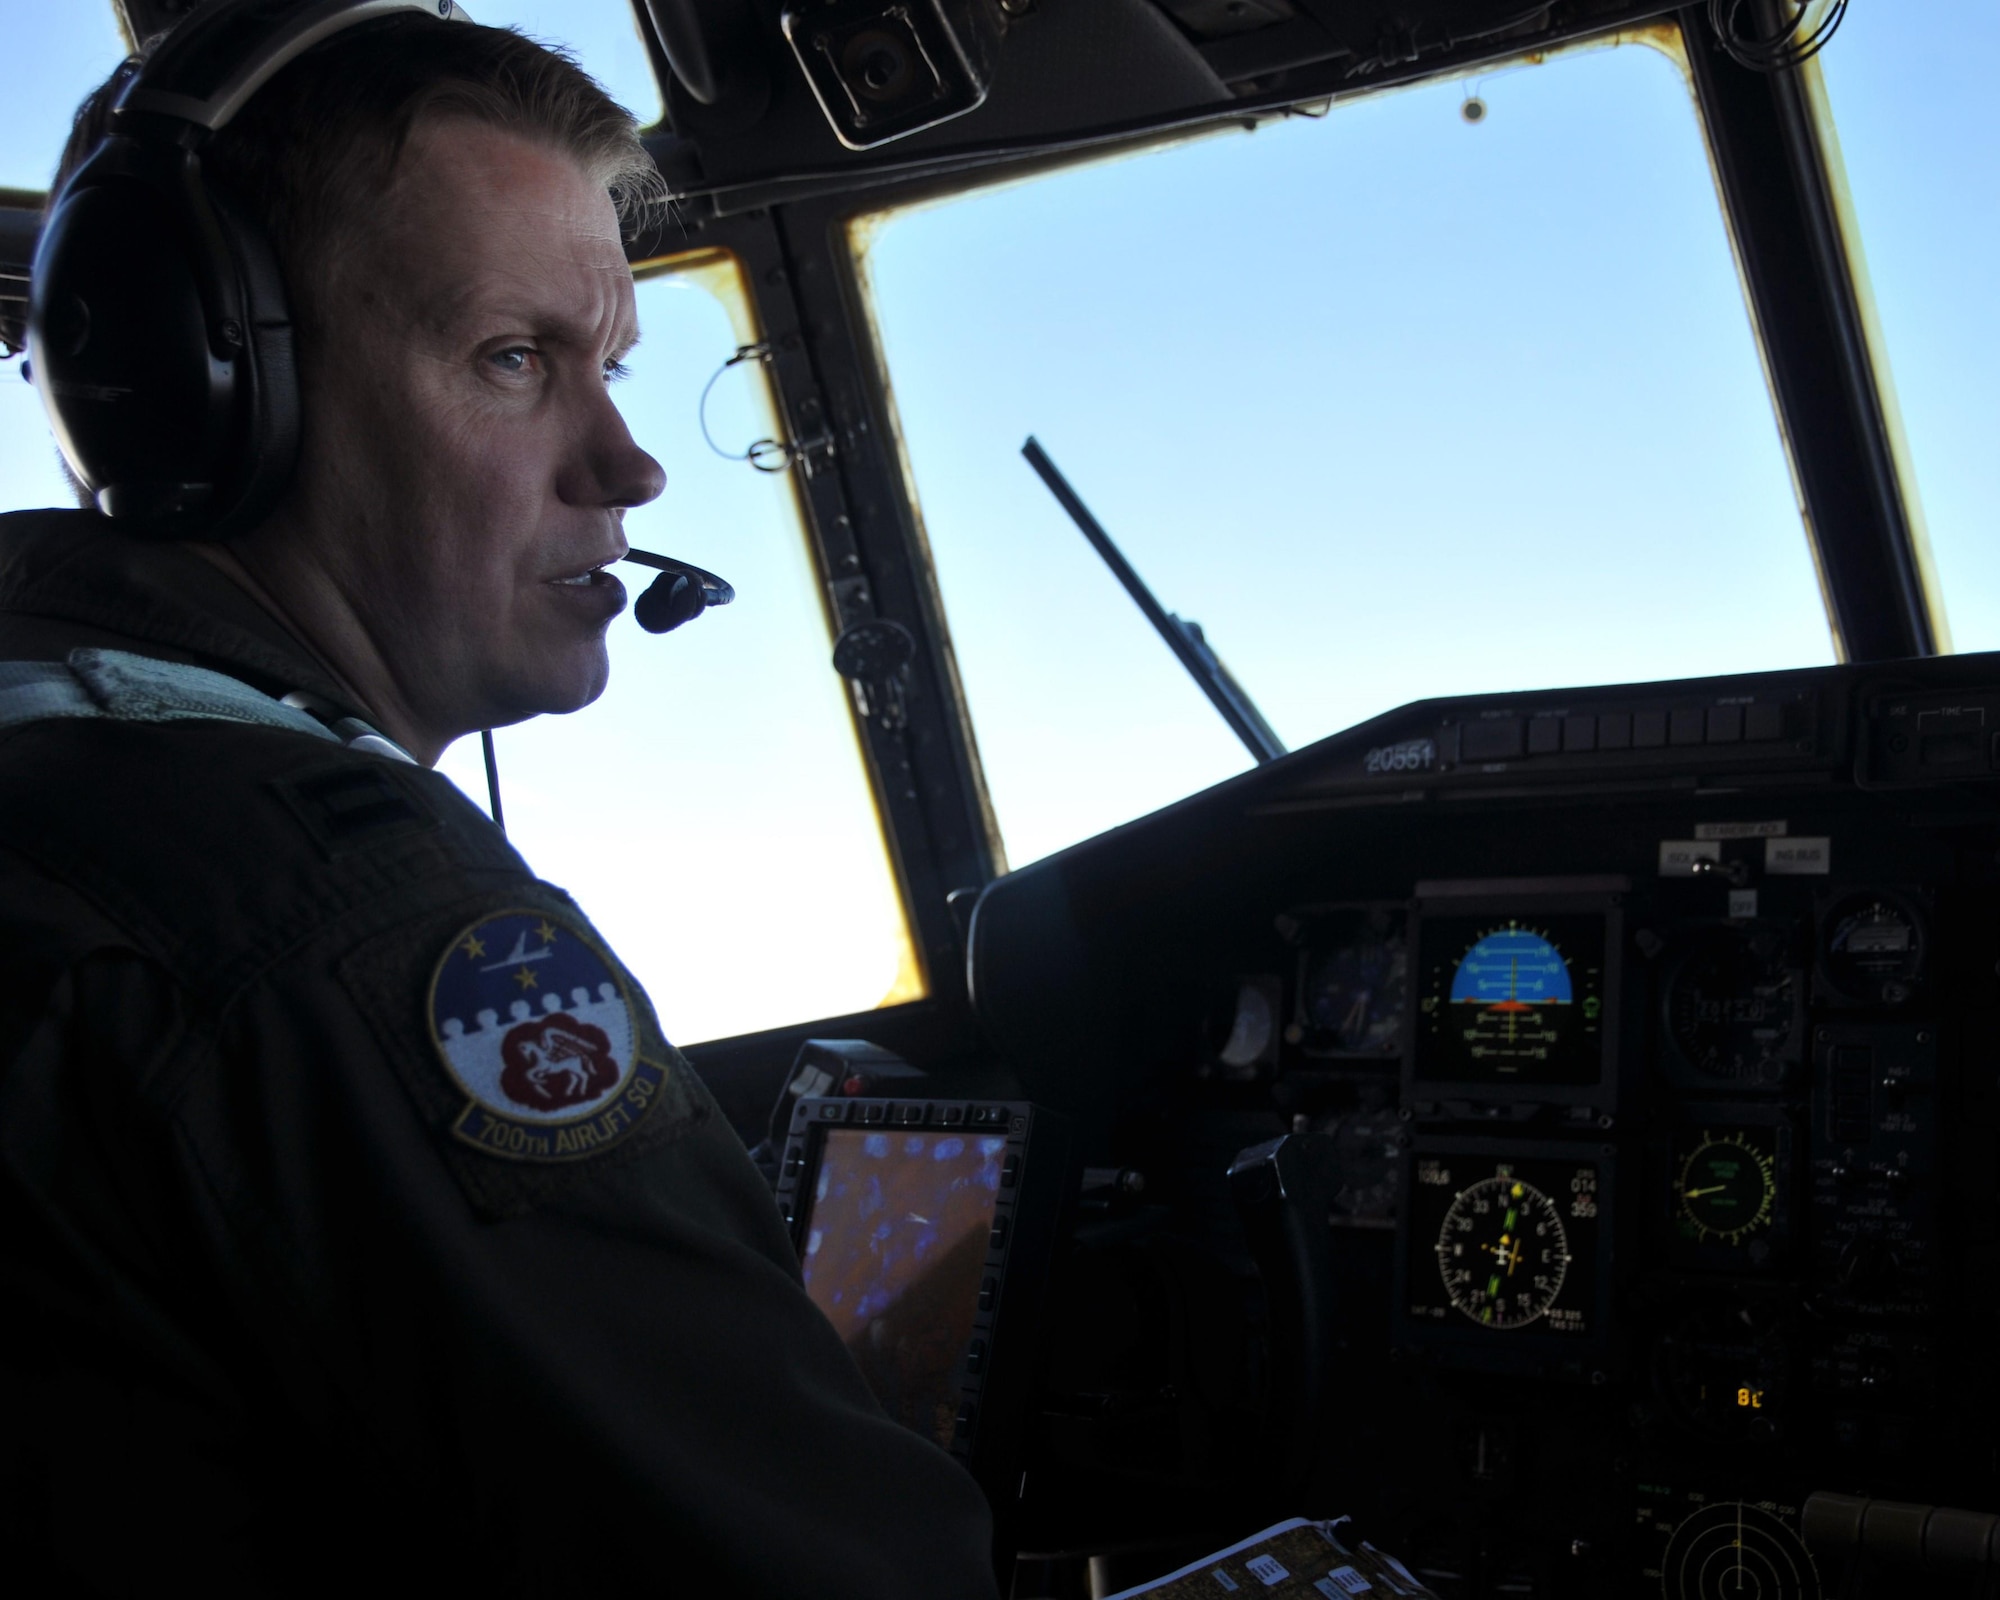 Capt. Jamie Atkinson, 700th Airlift Squadron C-130 aircraft commander, talks with the crew on the flight deck of the C-130 shortly after taking off from Aviano Air Base, Italy on April 11, 2016. The C-130 carried a fully-armored humvee, which it airdropped over Hohenfels Training Area, Germany. (U.S. Air Force photo/ Senior Airman Andrew J. Park)
